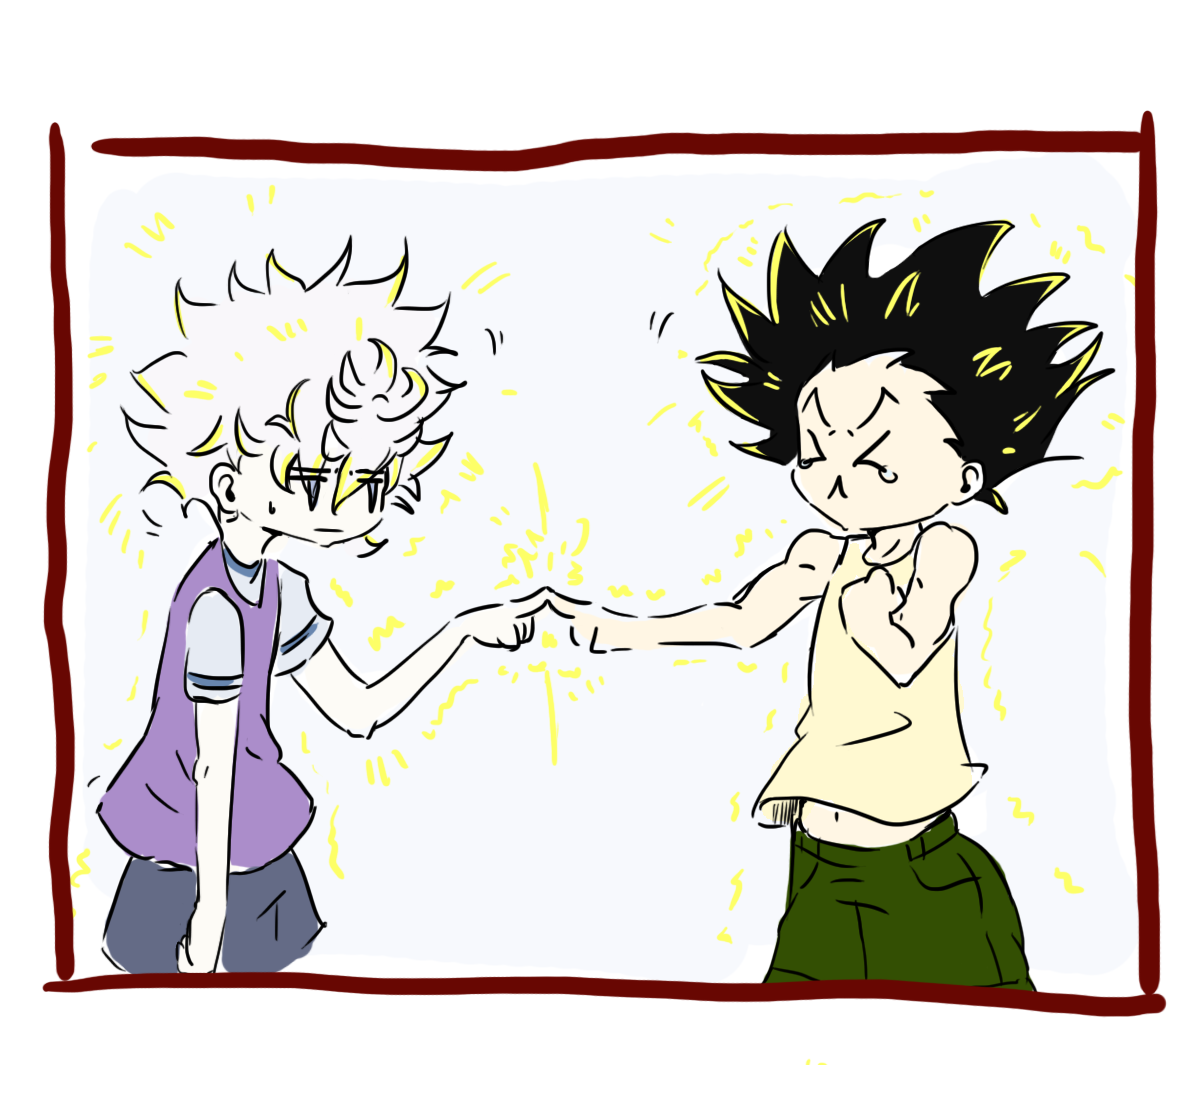 aoli-ne:Have you ever thought what is the mystery behind Gon’s hair? (Before he